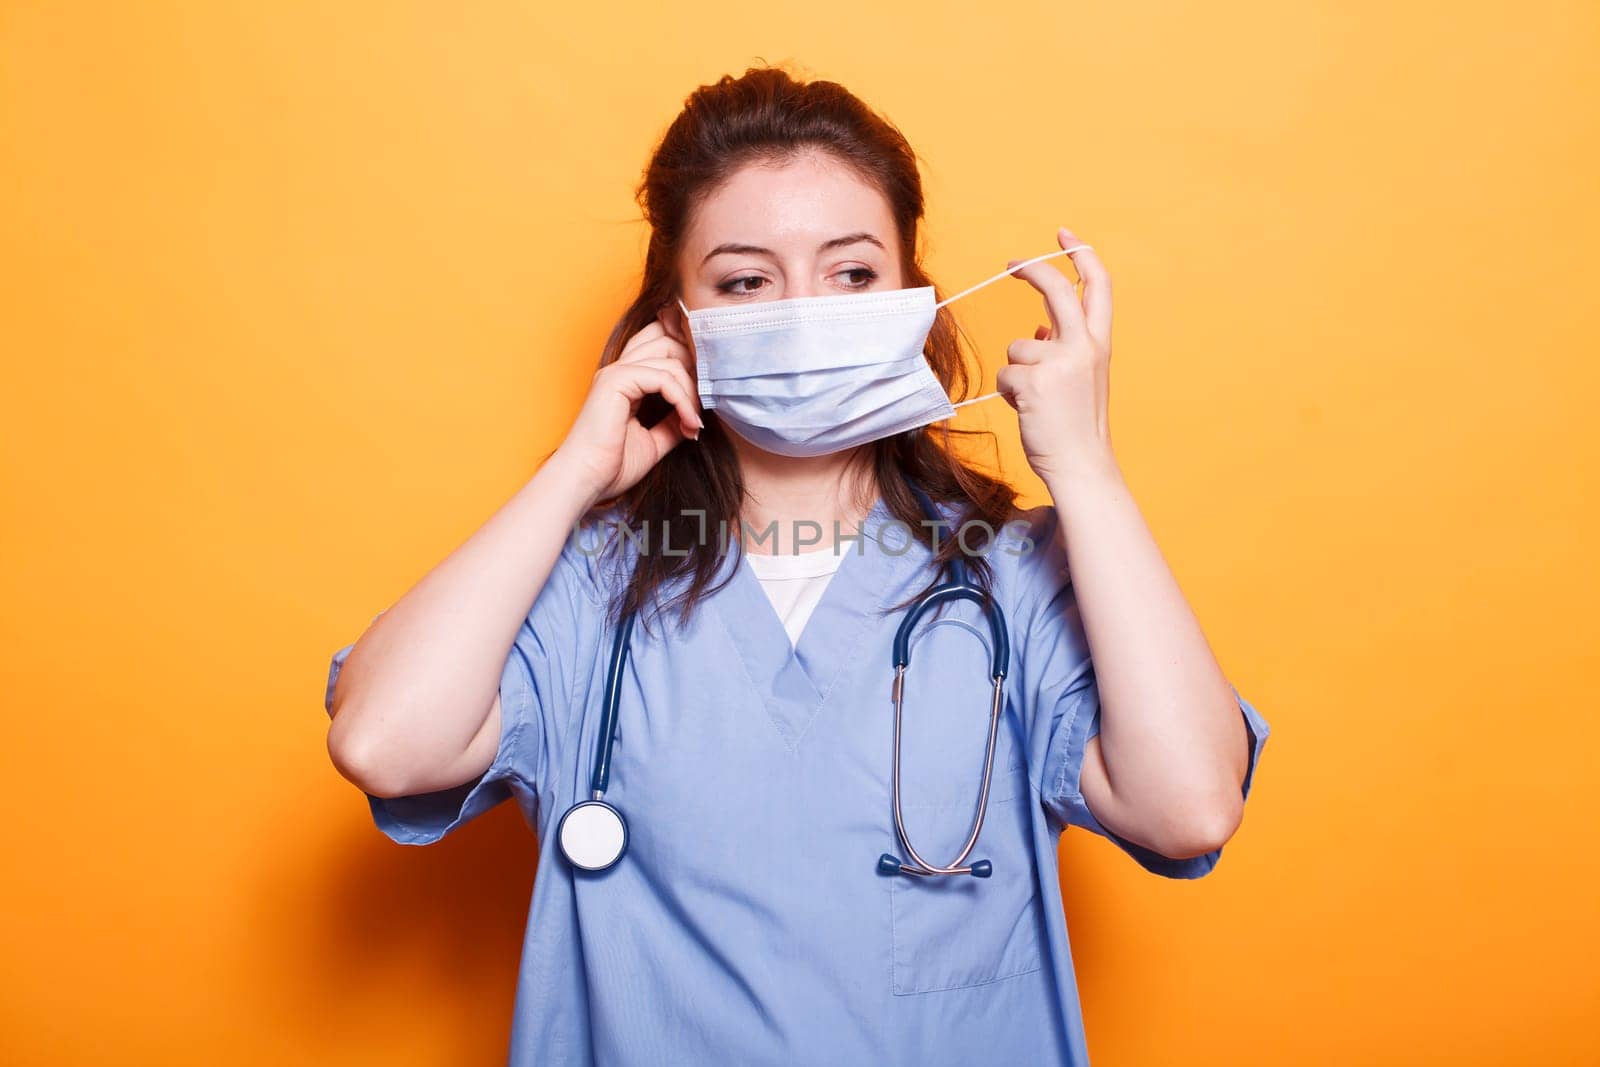 Nurse practitioner putting on face mask for protection in front of camera. Female medical doctor wearing scrubs and stethoscope having safety mask against coronavirus during pandemic.